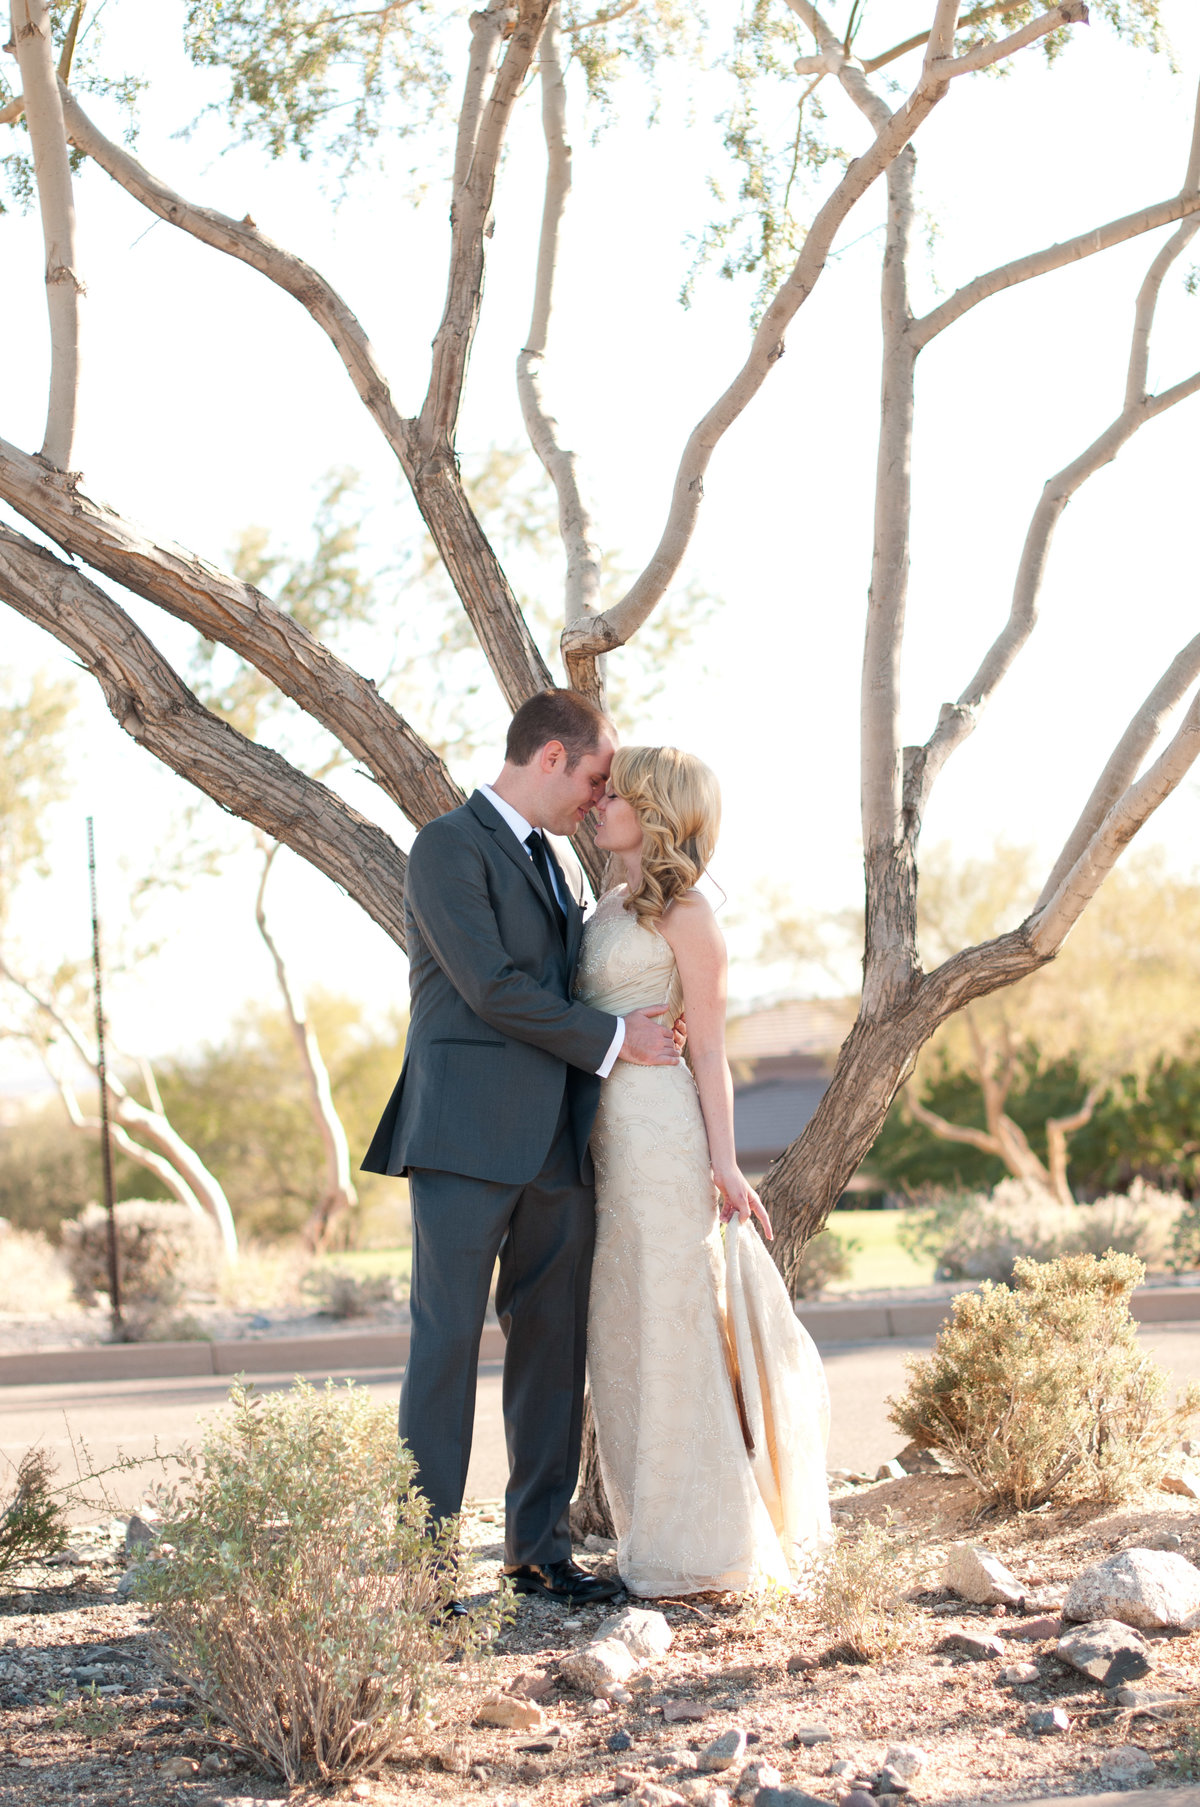 Romantic outdoor wedding in Palm Springs. Palm Springs Wedding Photographer for the sophisticated brides. Luxury Palm Springs wedding. Outdoor desert romantic wedding by Faria Munmun.